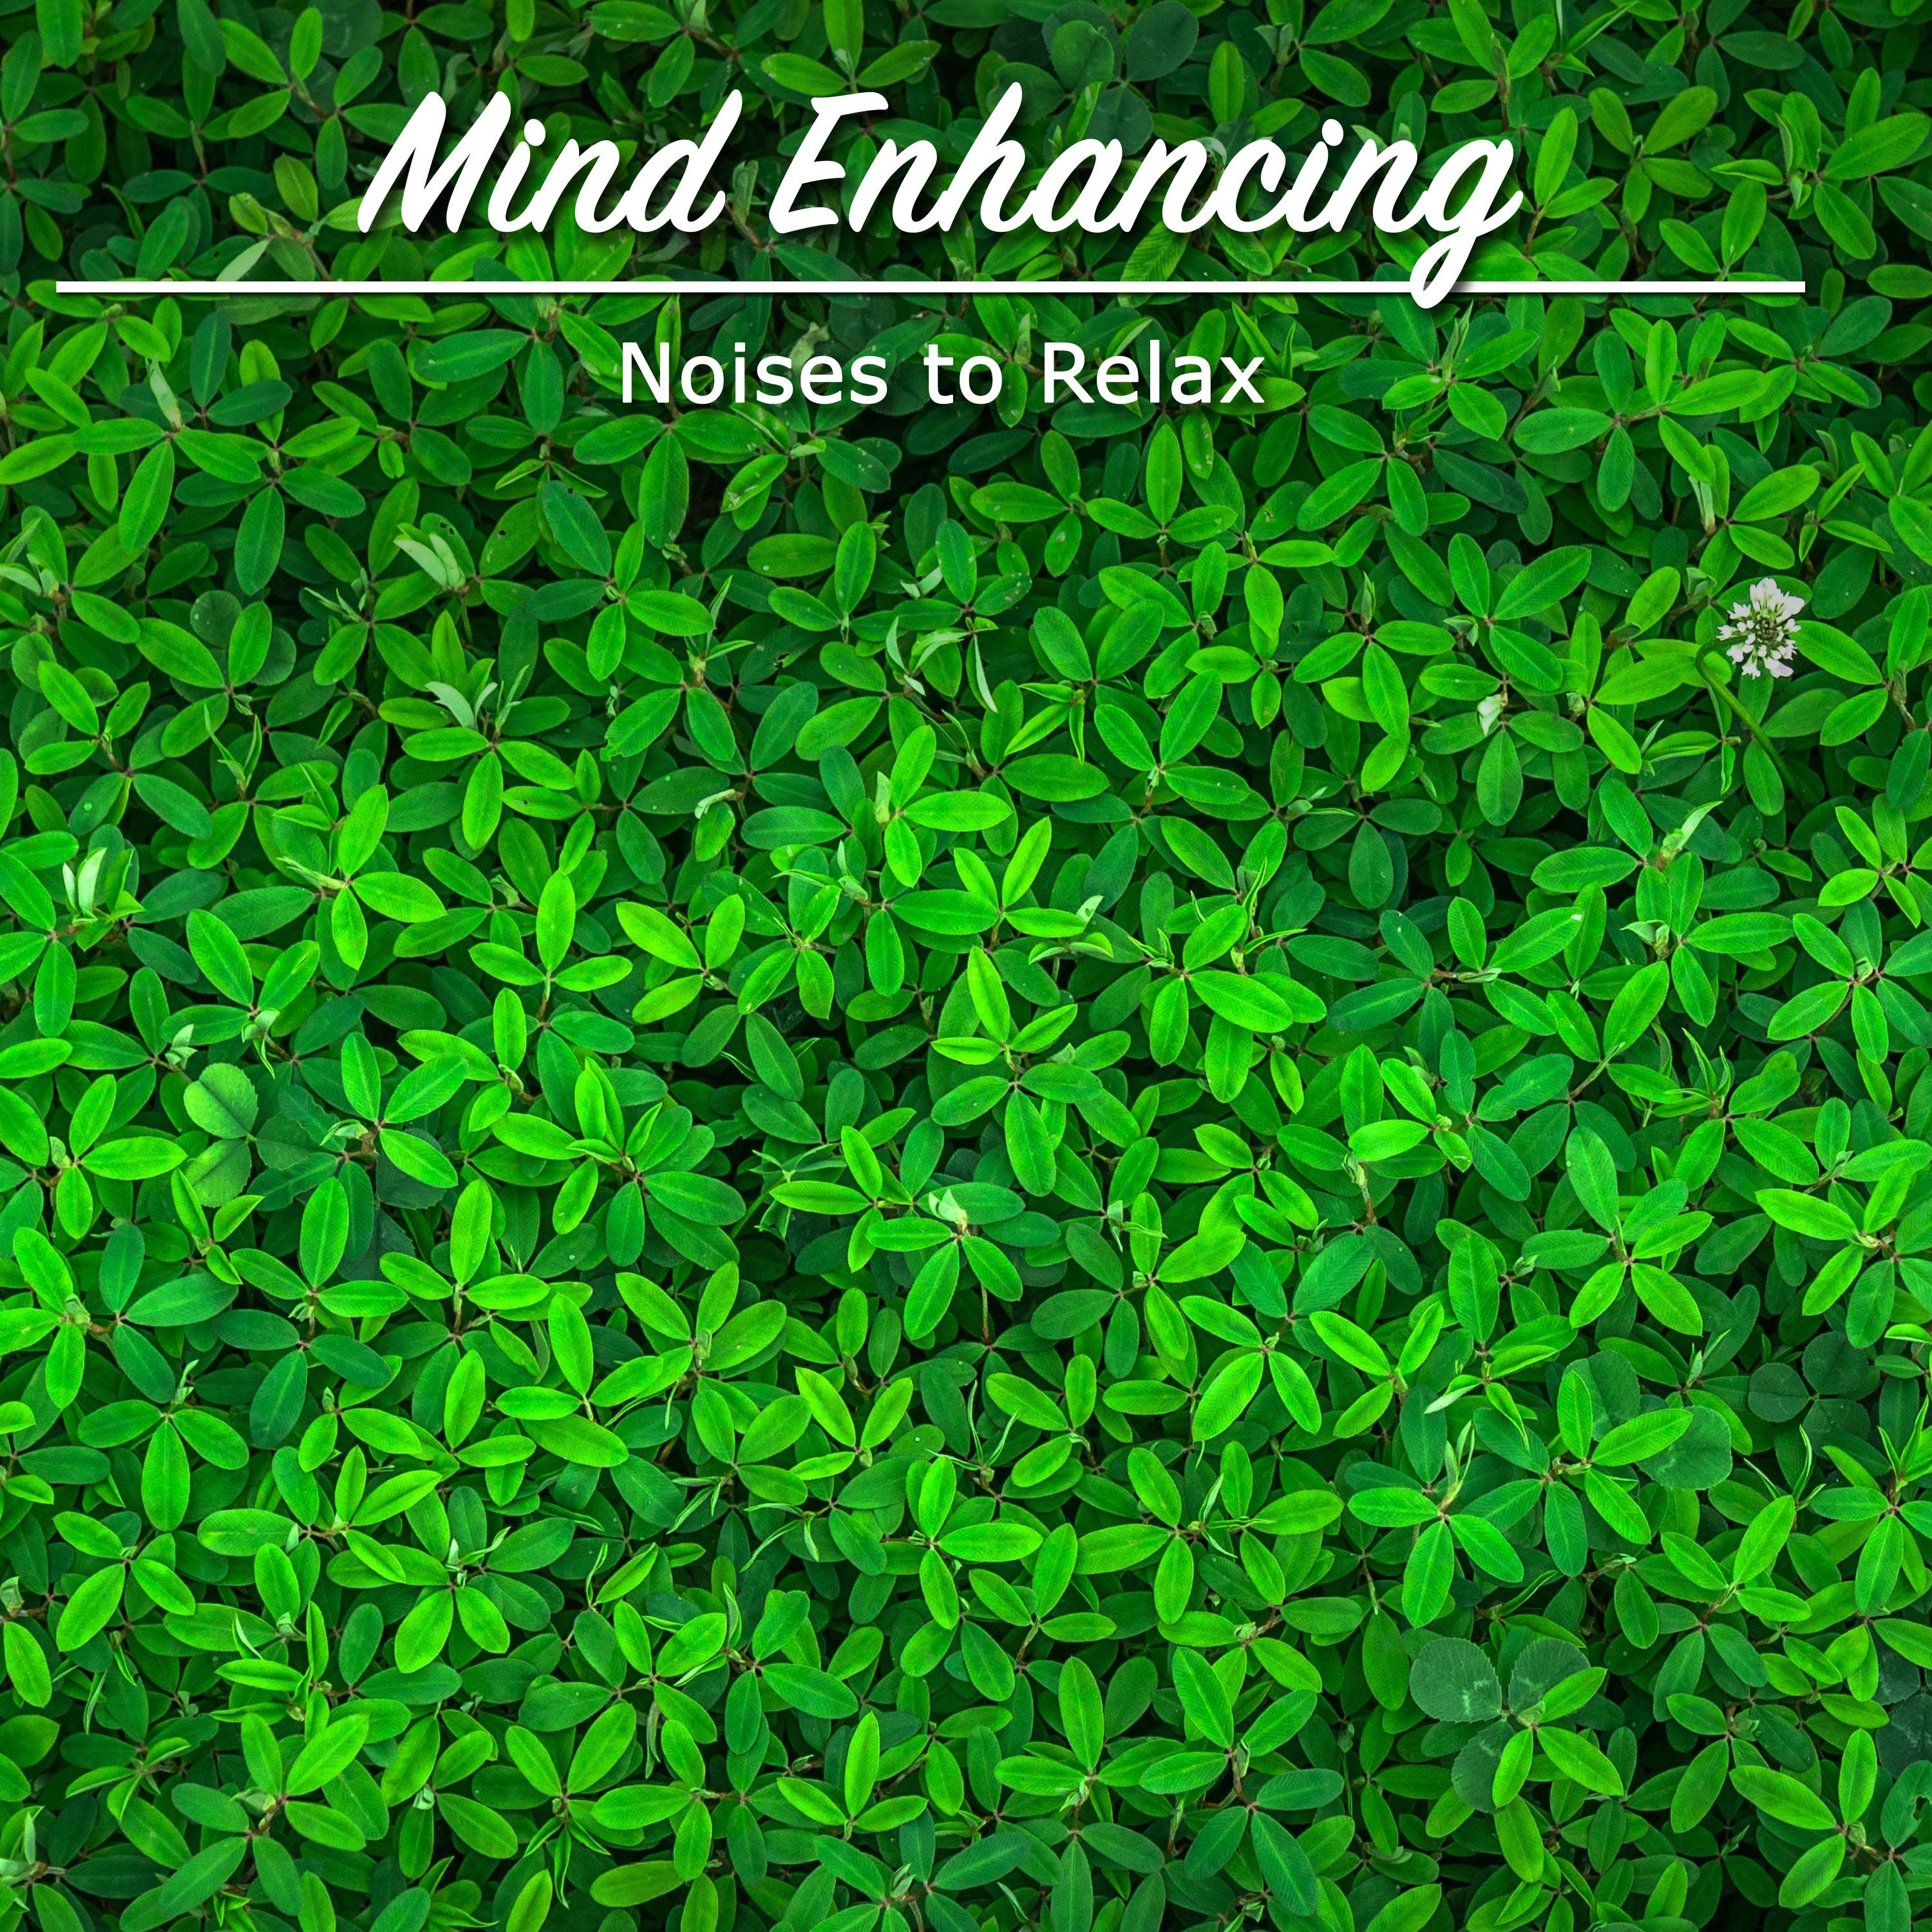 21 Harmonic Songs for Ultimate Relaxation